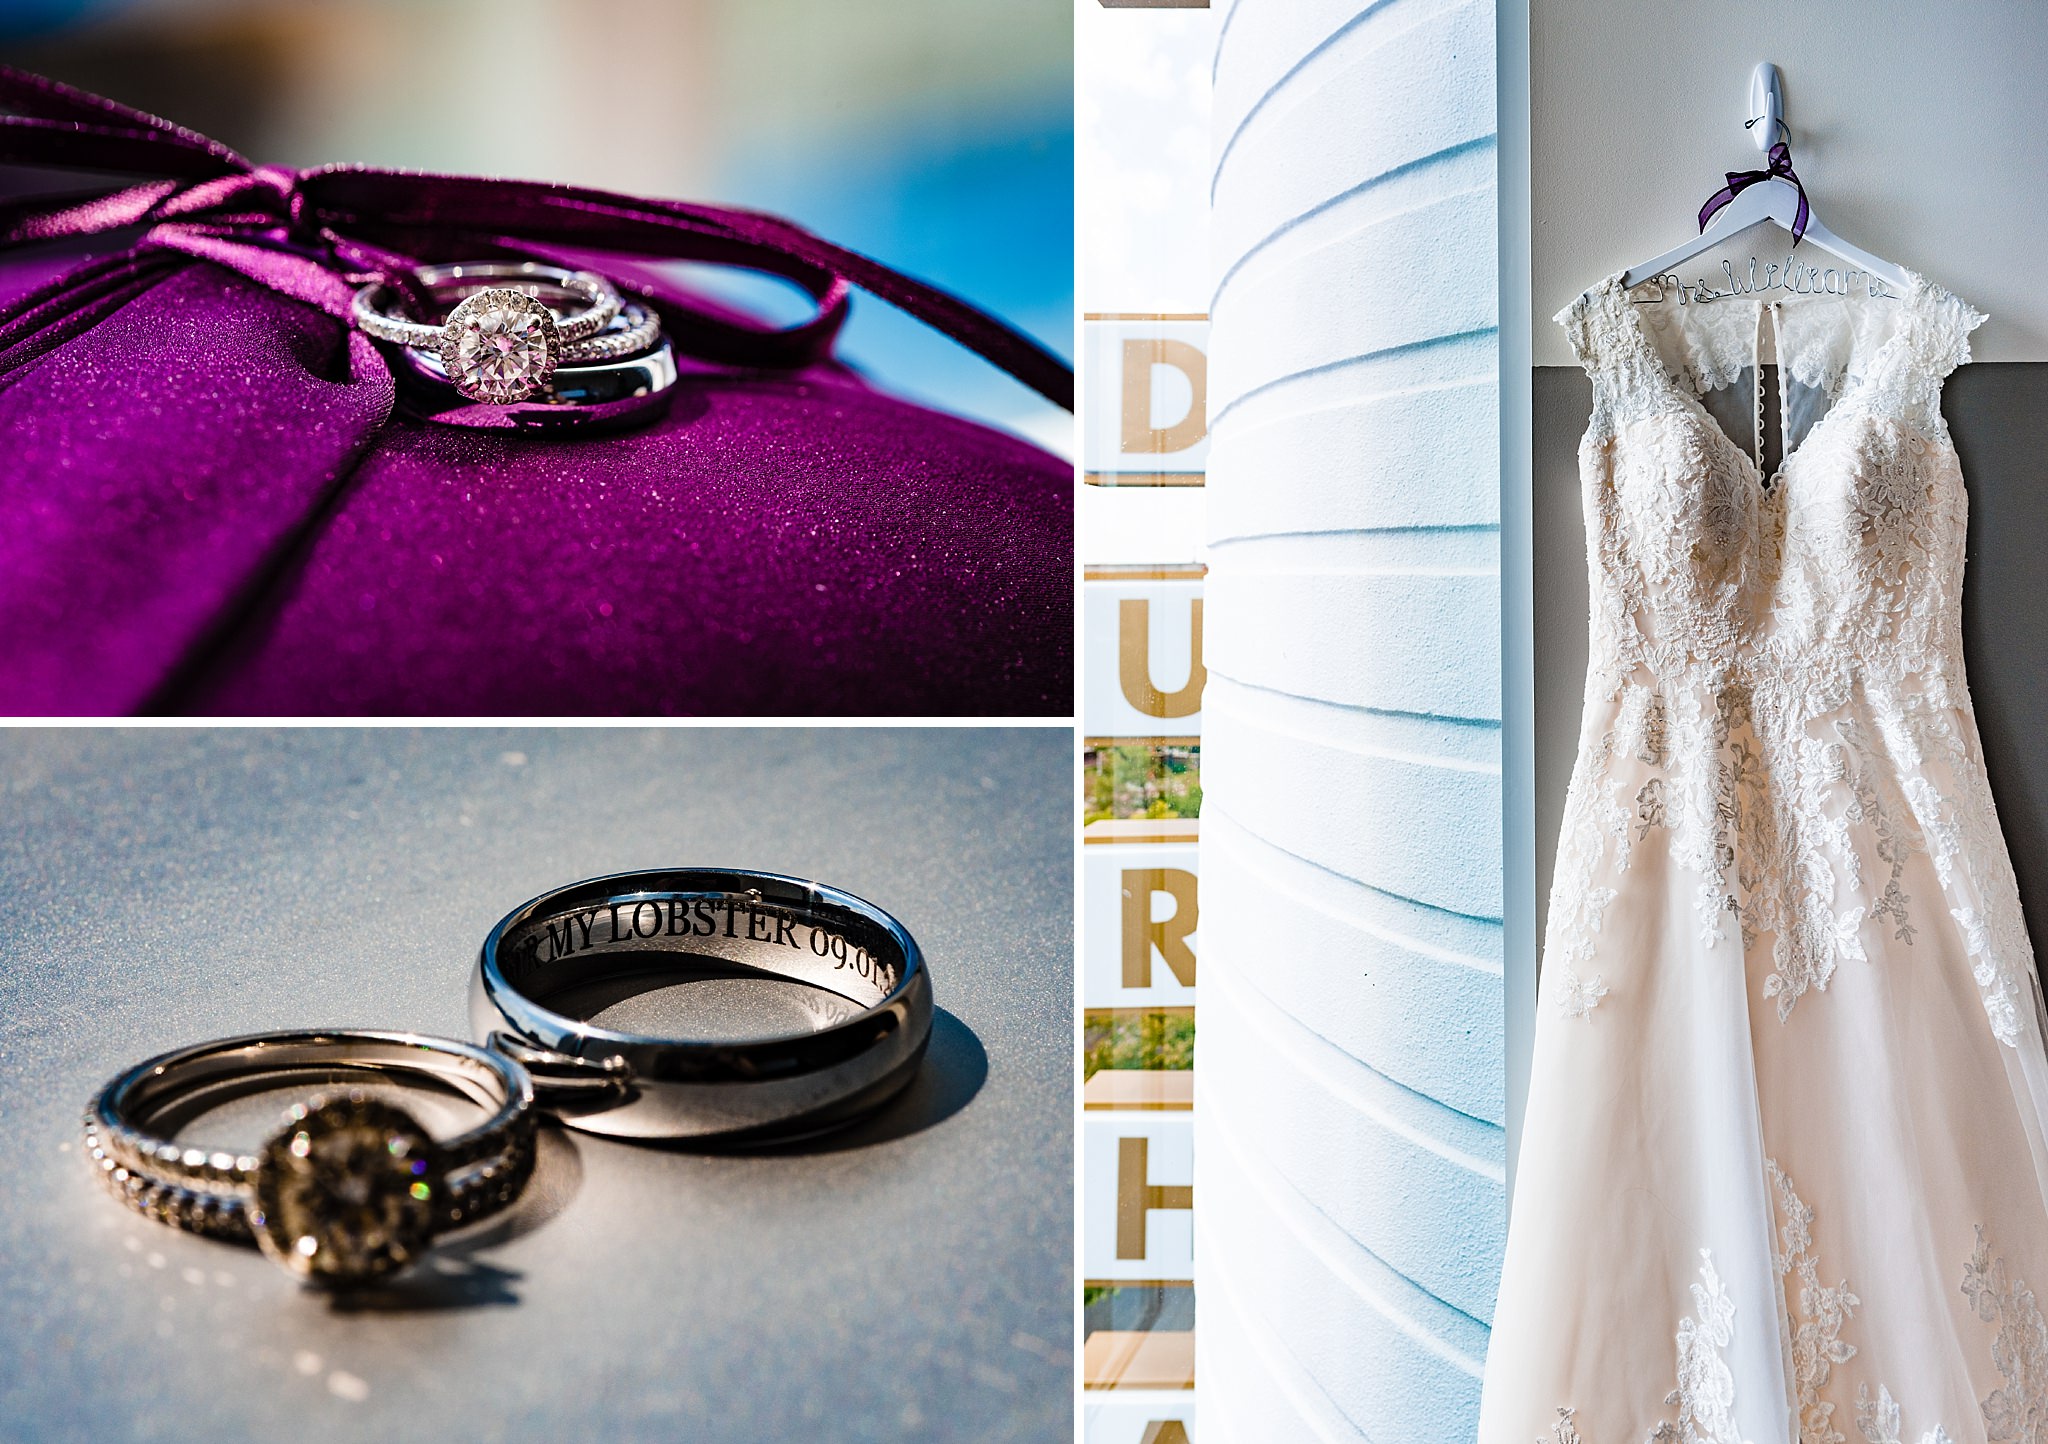 Detail shots of bride and groom's rings with "My Lobster" engraved as a Friends reference - Durham wedding photographers